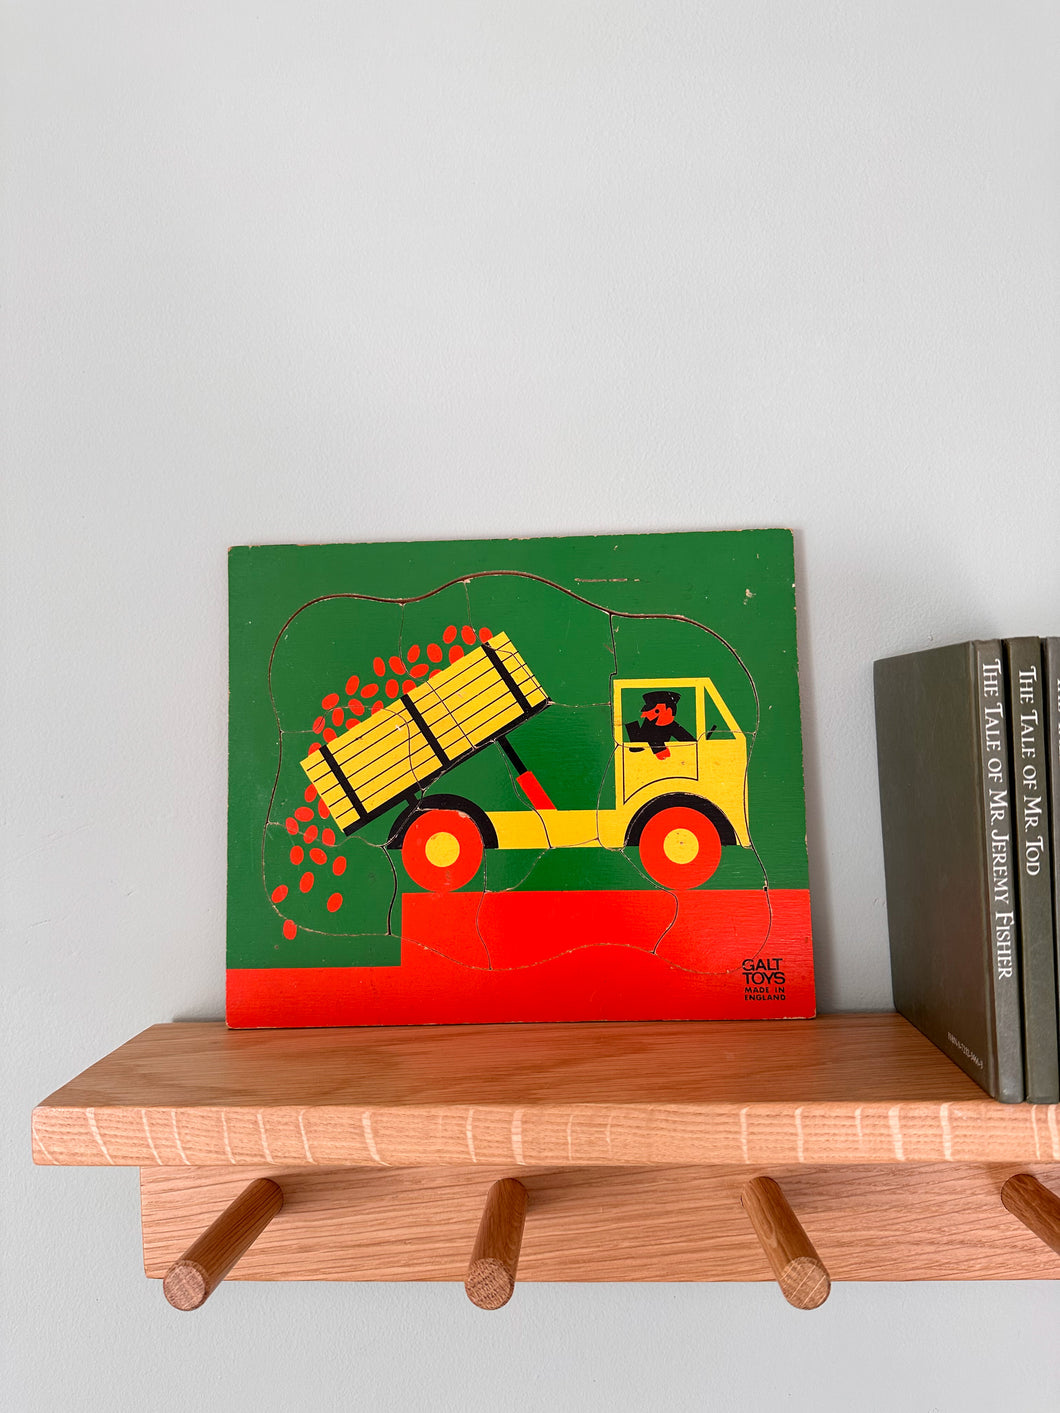 Vintage wooden lorry jigsaw puzzle, green, red and yellow, made in England by GALT - Moppet